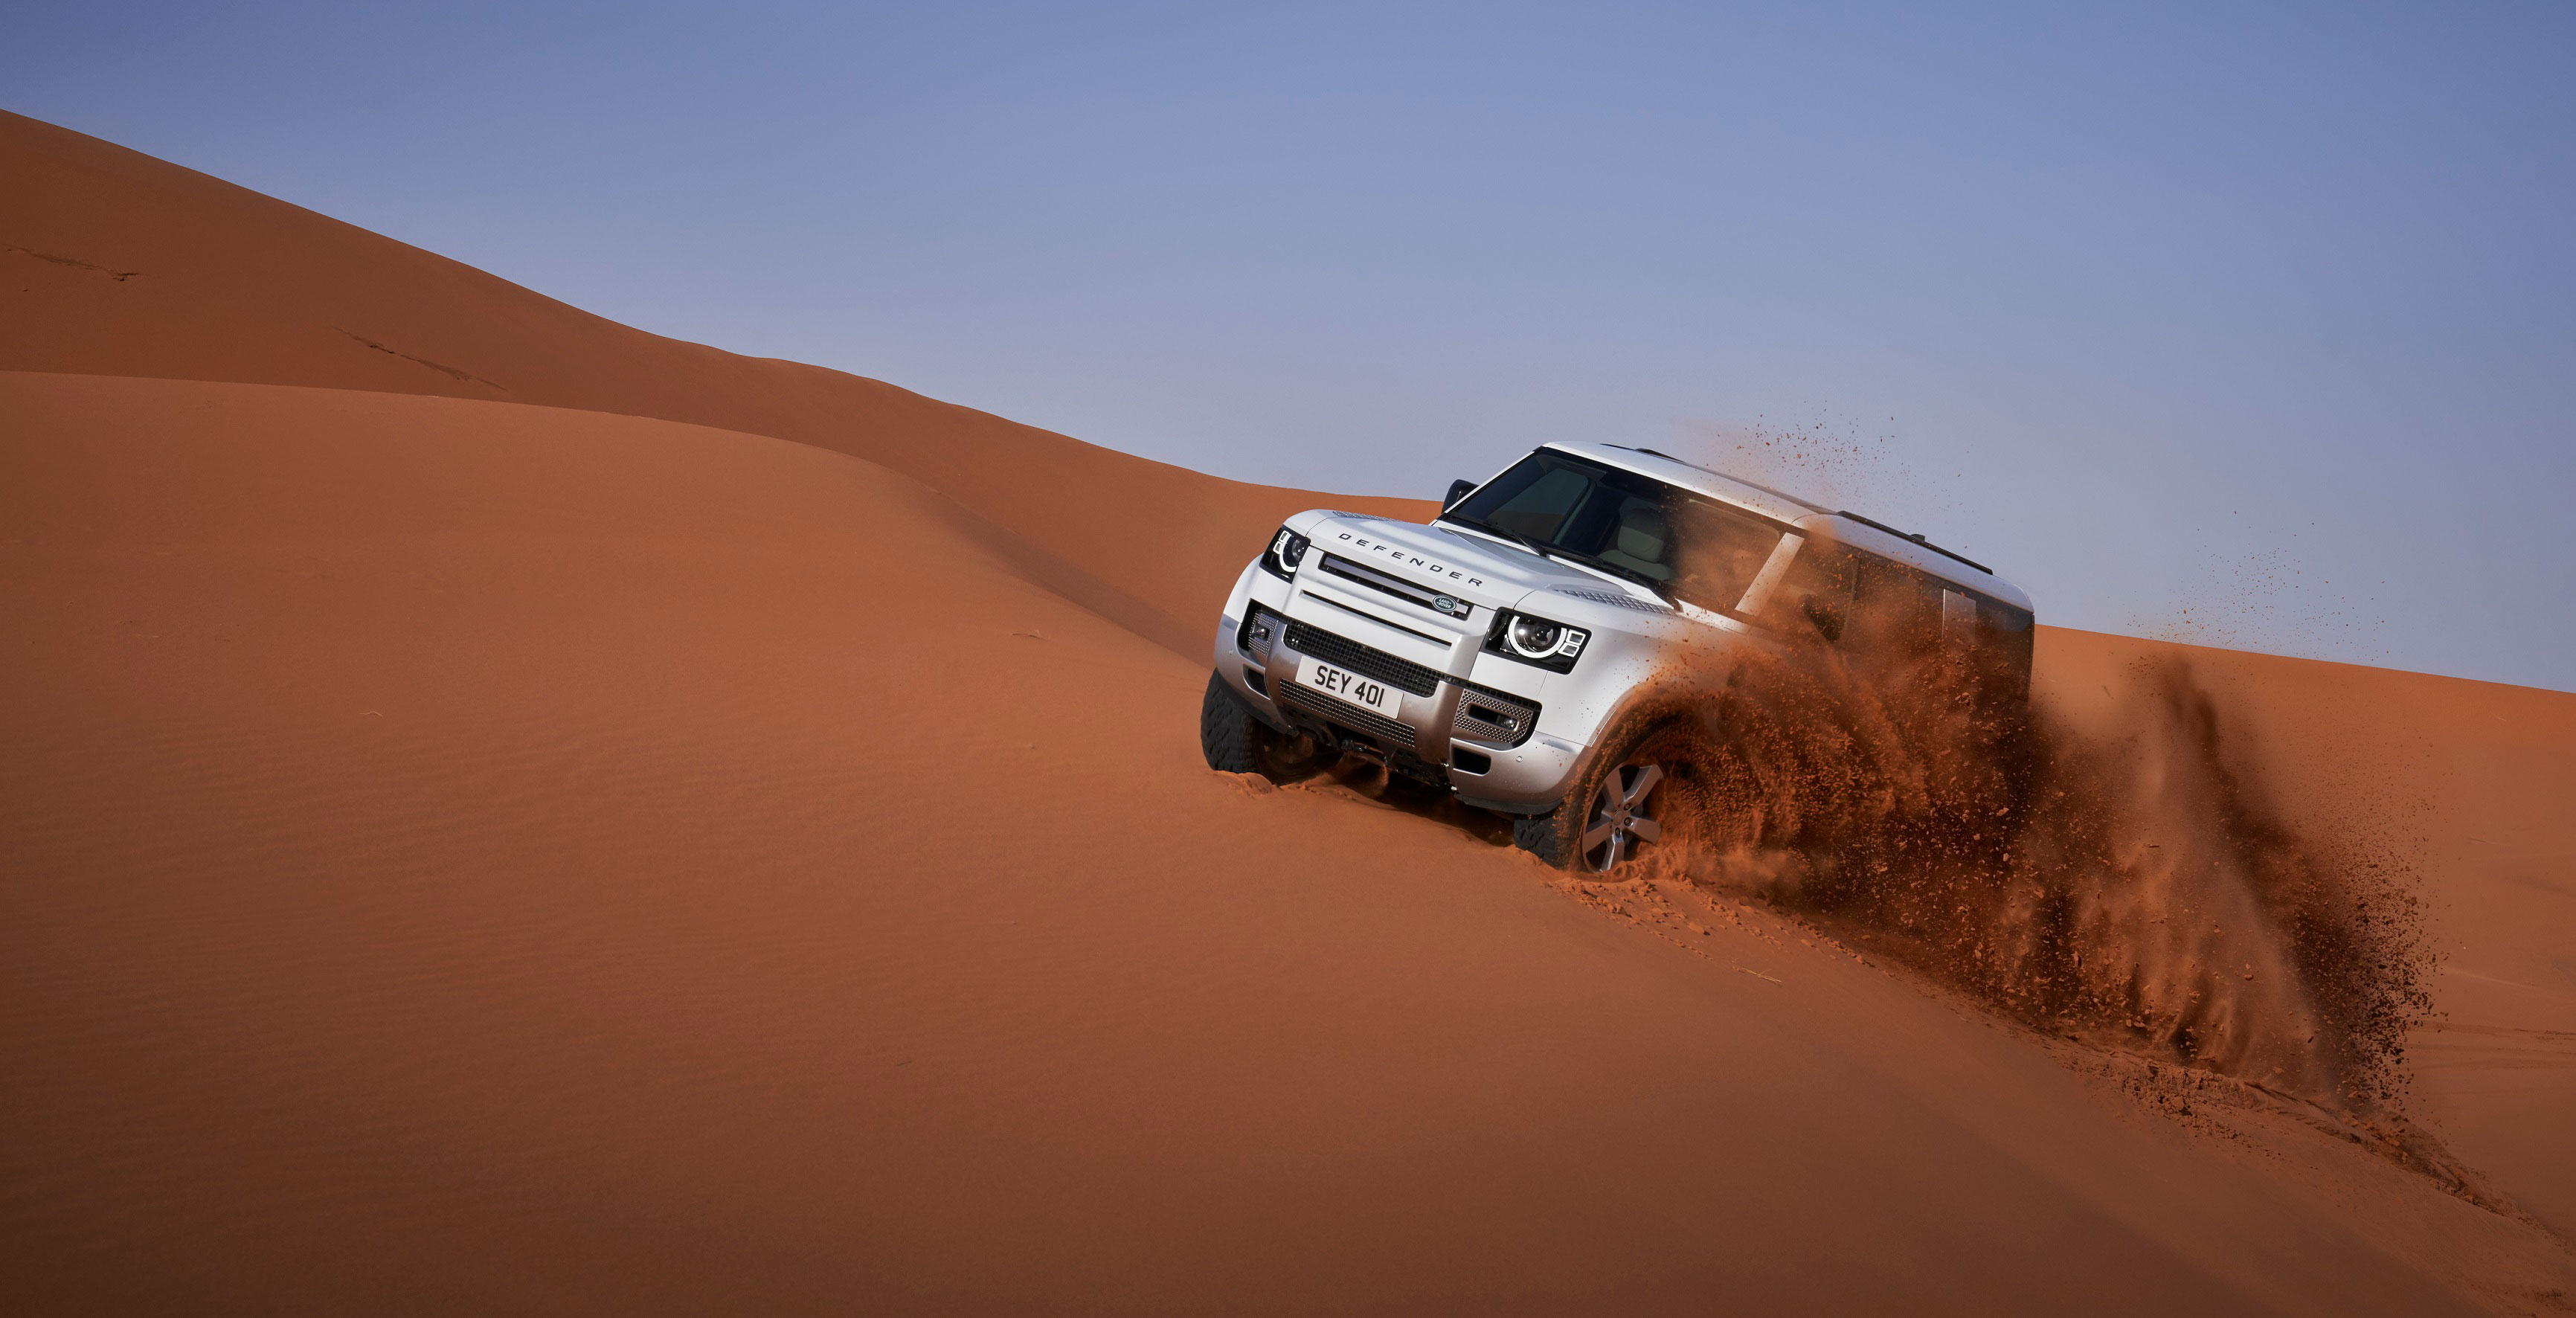 New Land Rover Defender 130 The Unstoppable 8-Seat Explorer